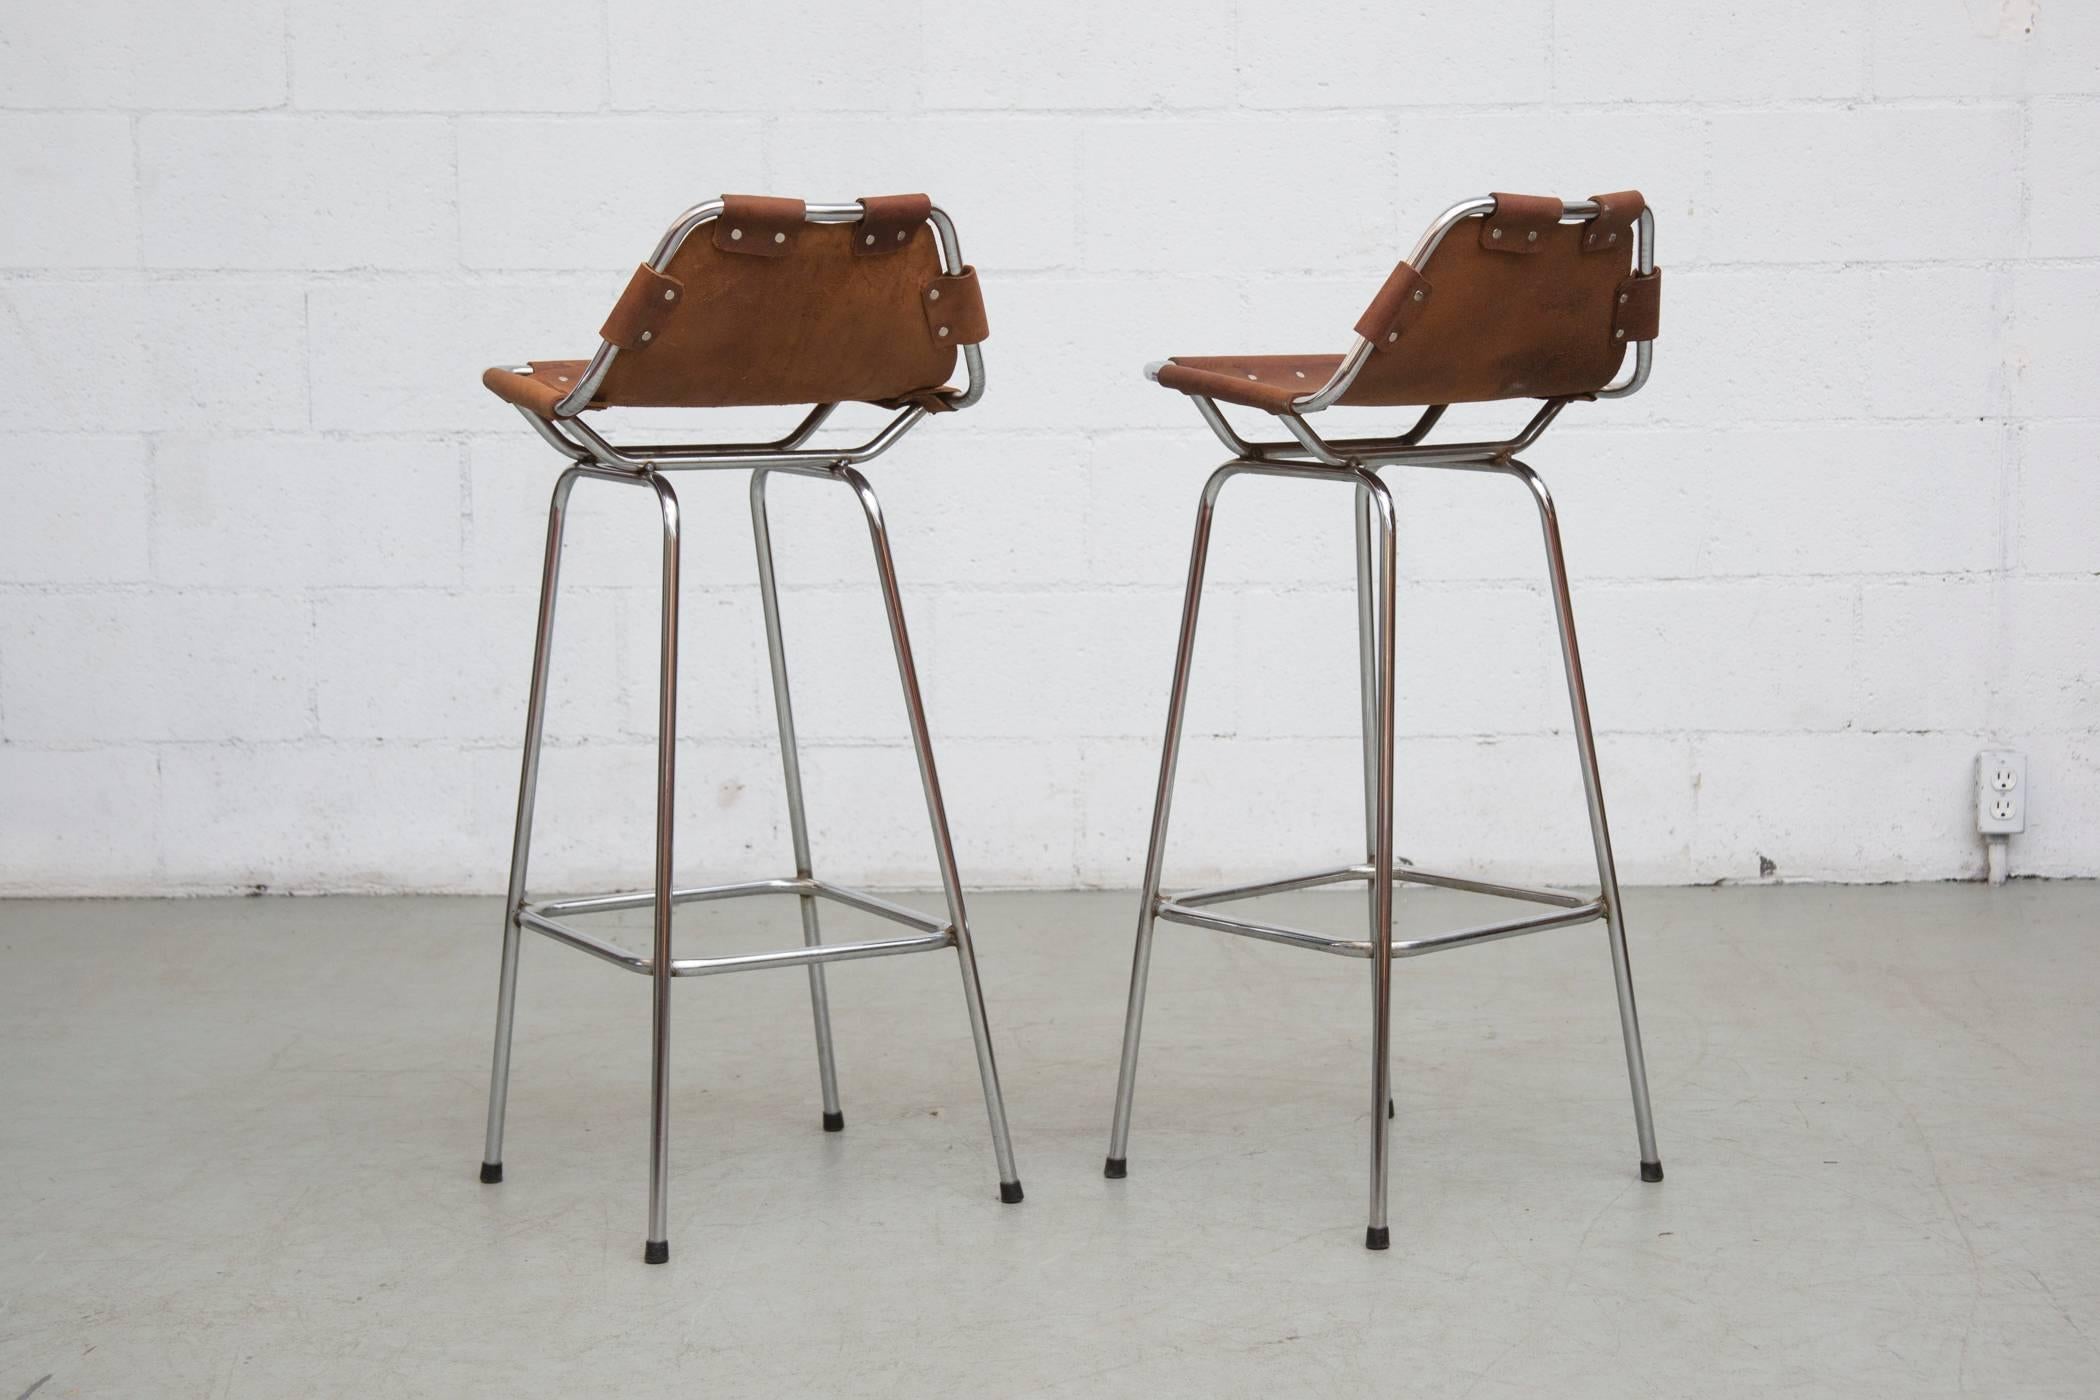 Pair of Perriand style bar stools with chrome frame and new natural leather seating. Chrome in original condition. Some signs of wear and repair. Stunning set.